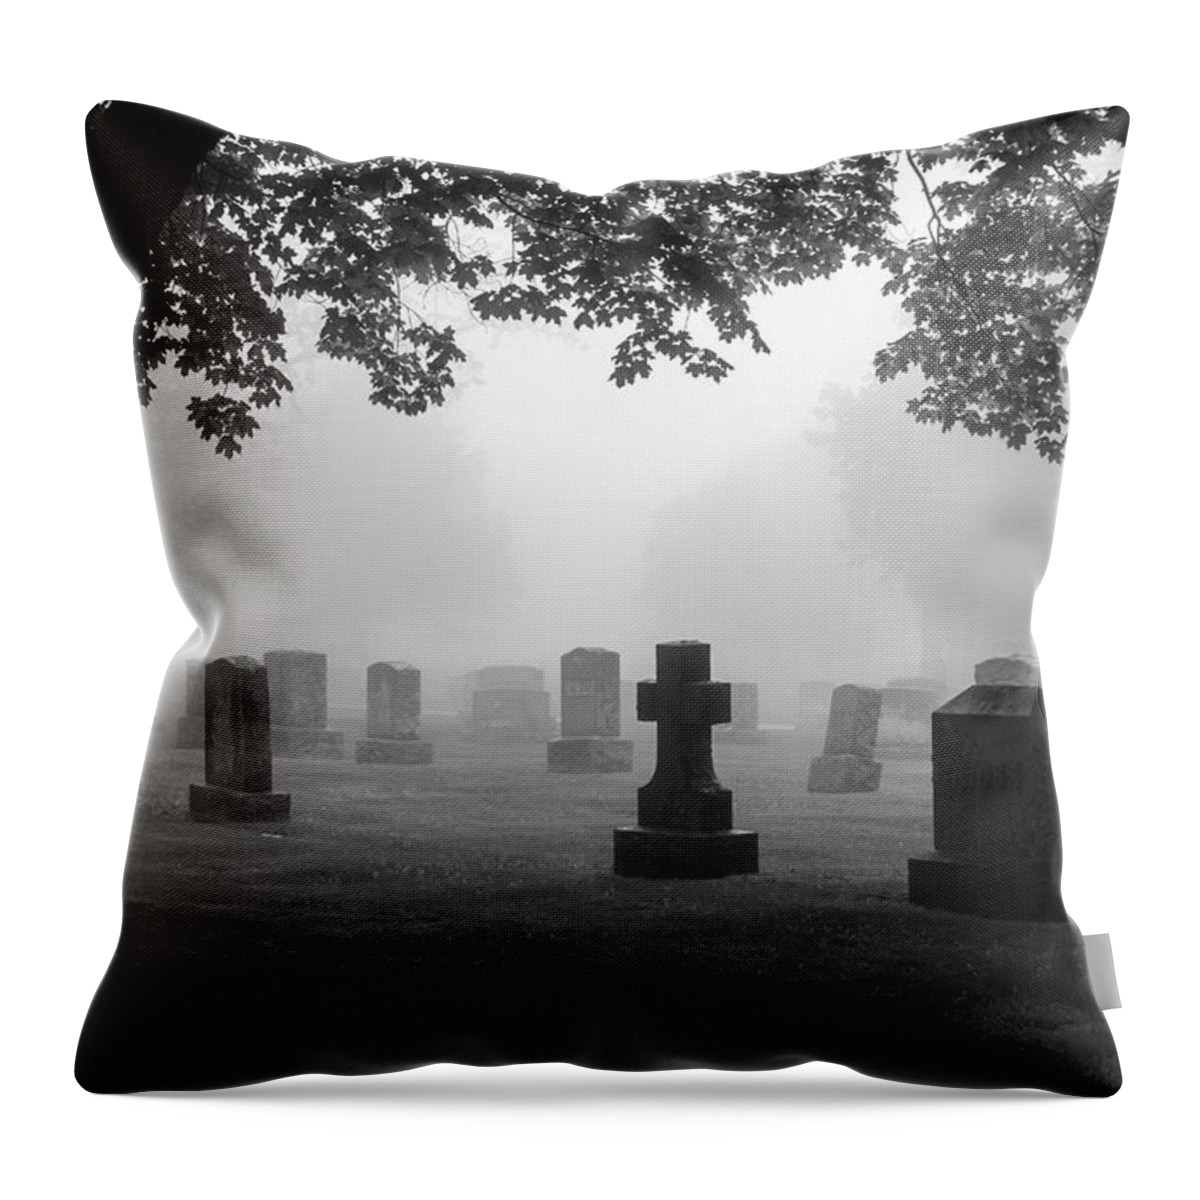 Cemetery Throw Pillow featuring the photograph If I Could Turn Back Time... by Mary Amerman